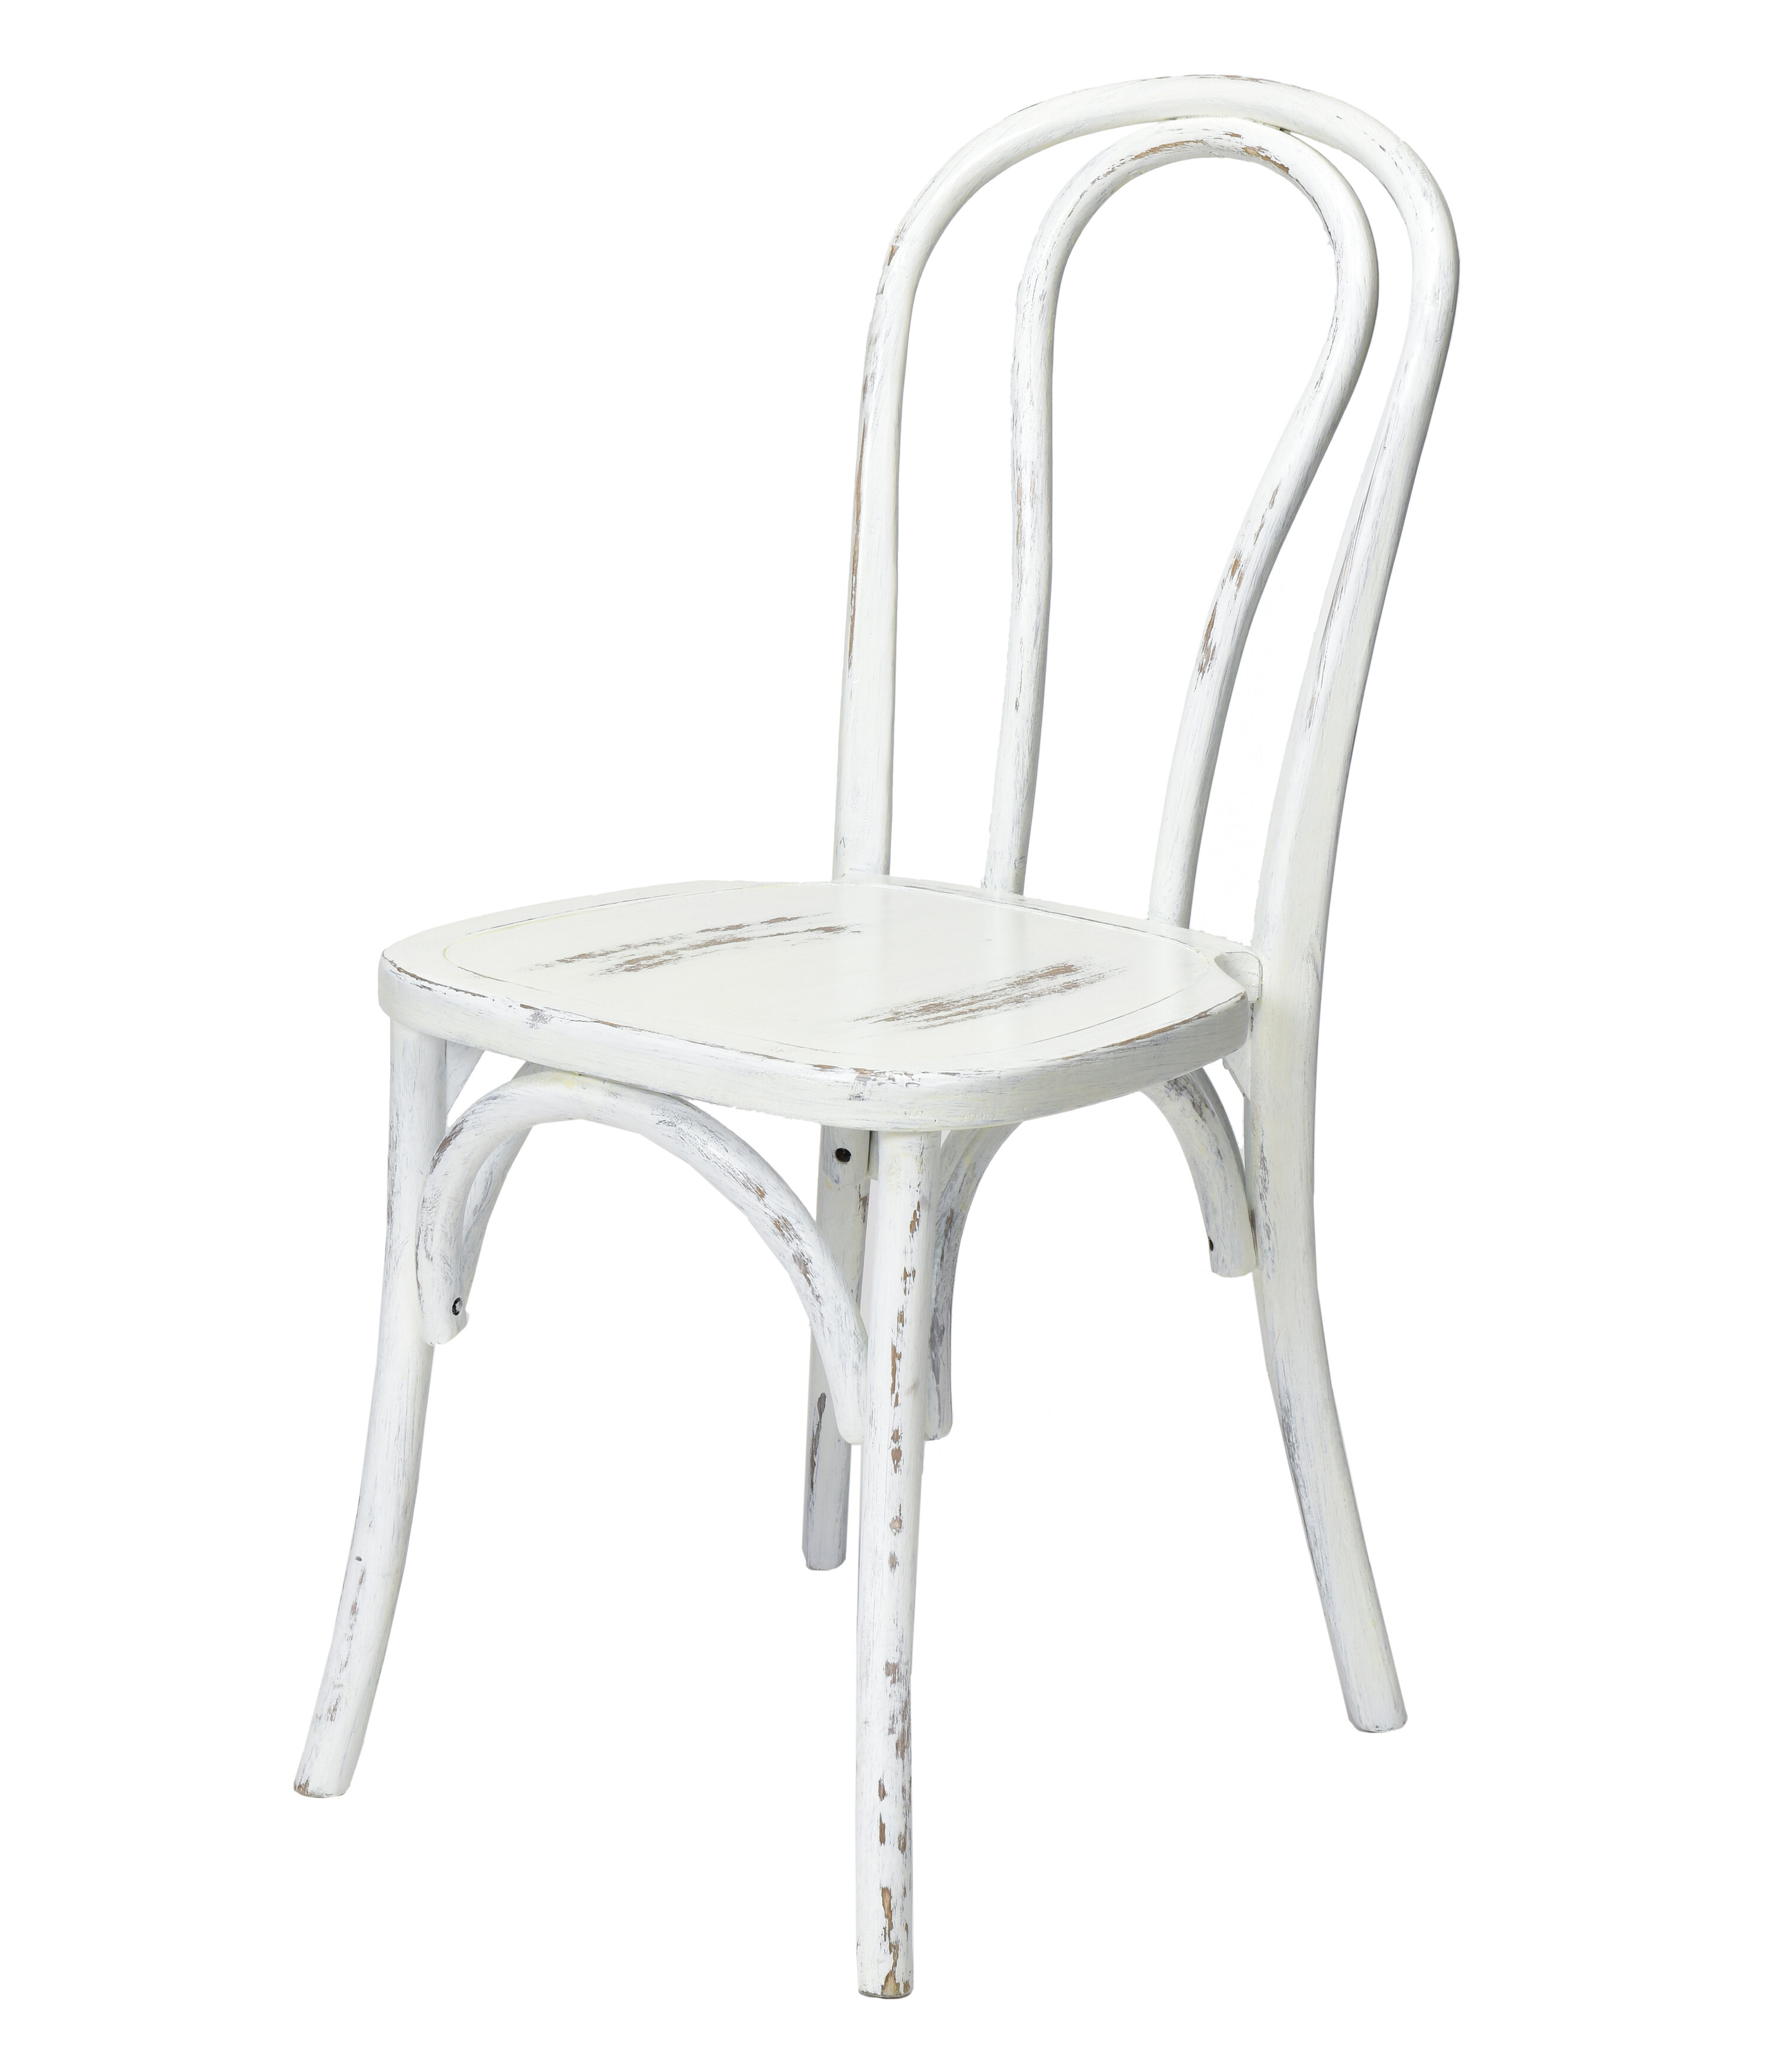 Black Resin Chiavari Chair - Commercial Quality Stackable